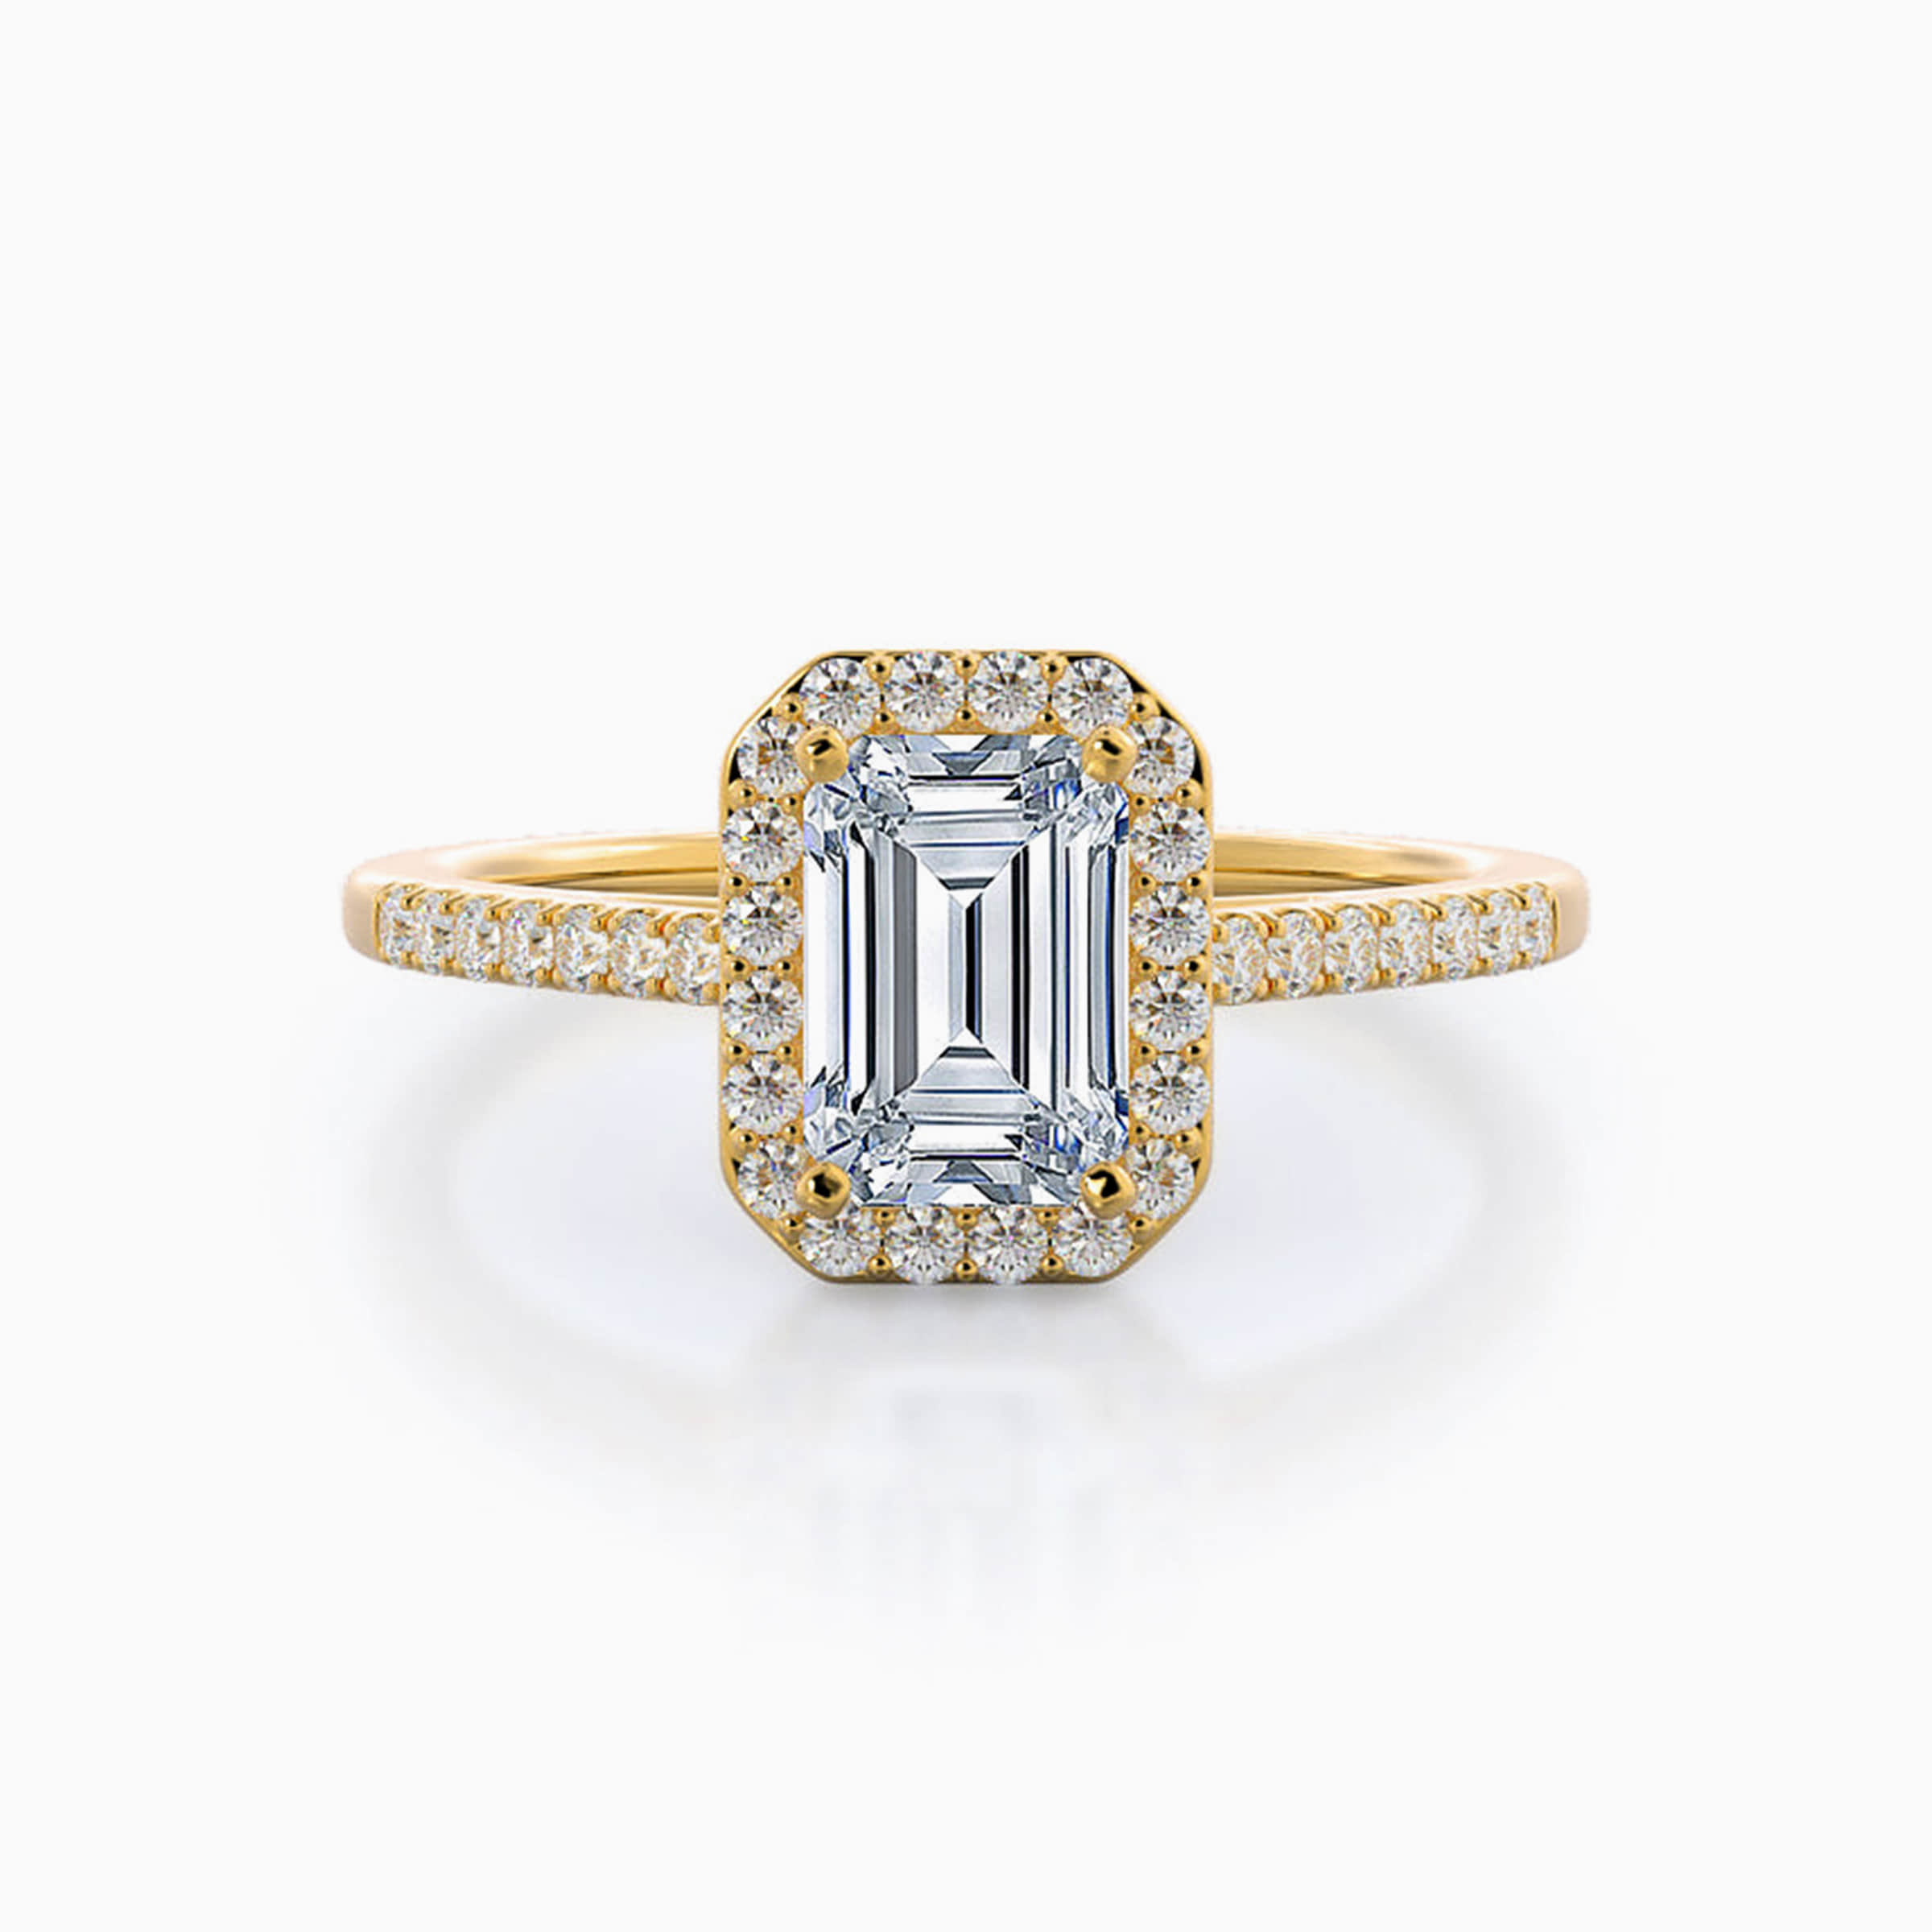 Darry Ring 3 carat emerald cut halo engagement ring